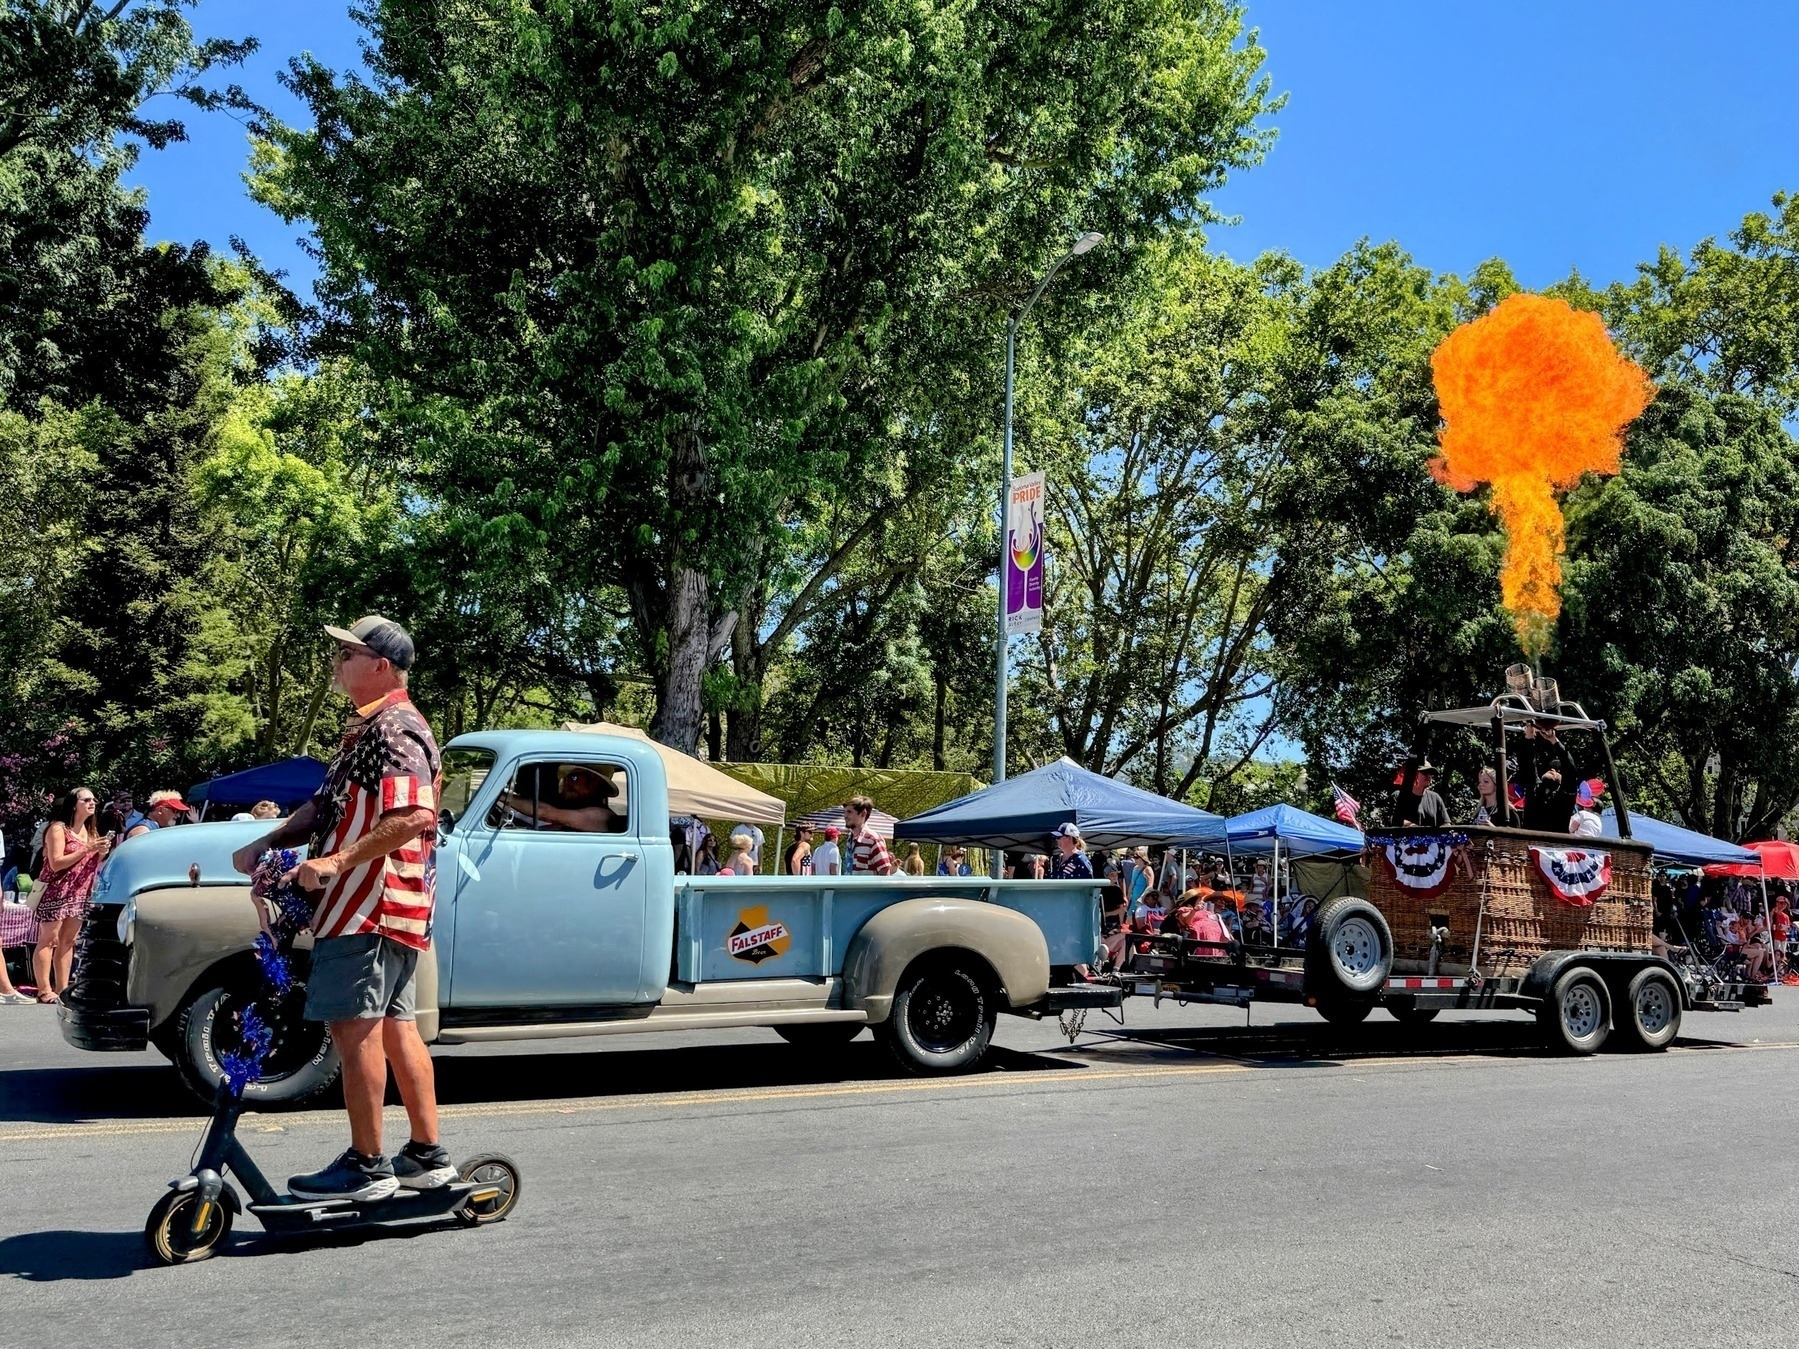 Antique truck pulling a hot air balloon basket blowing fire in the Sonoma July 4th parade